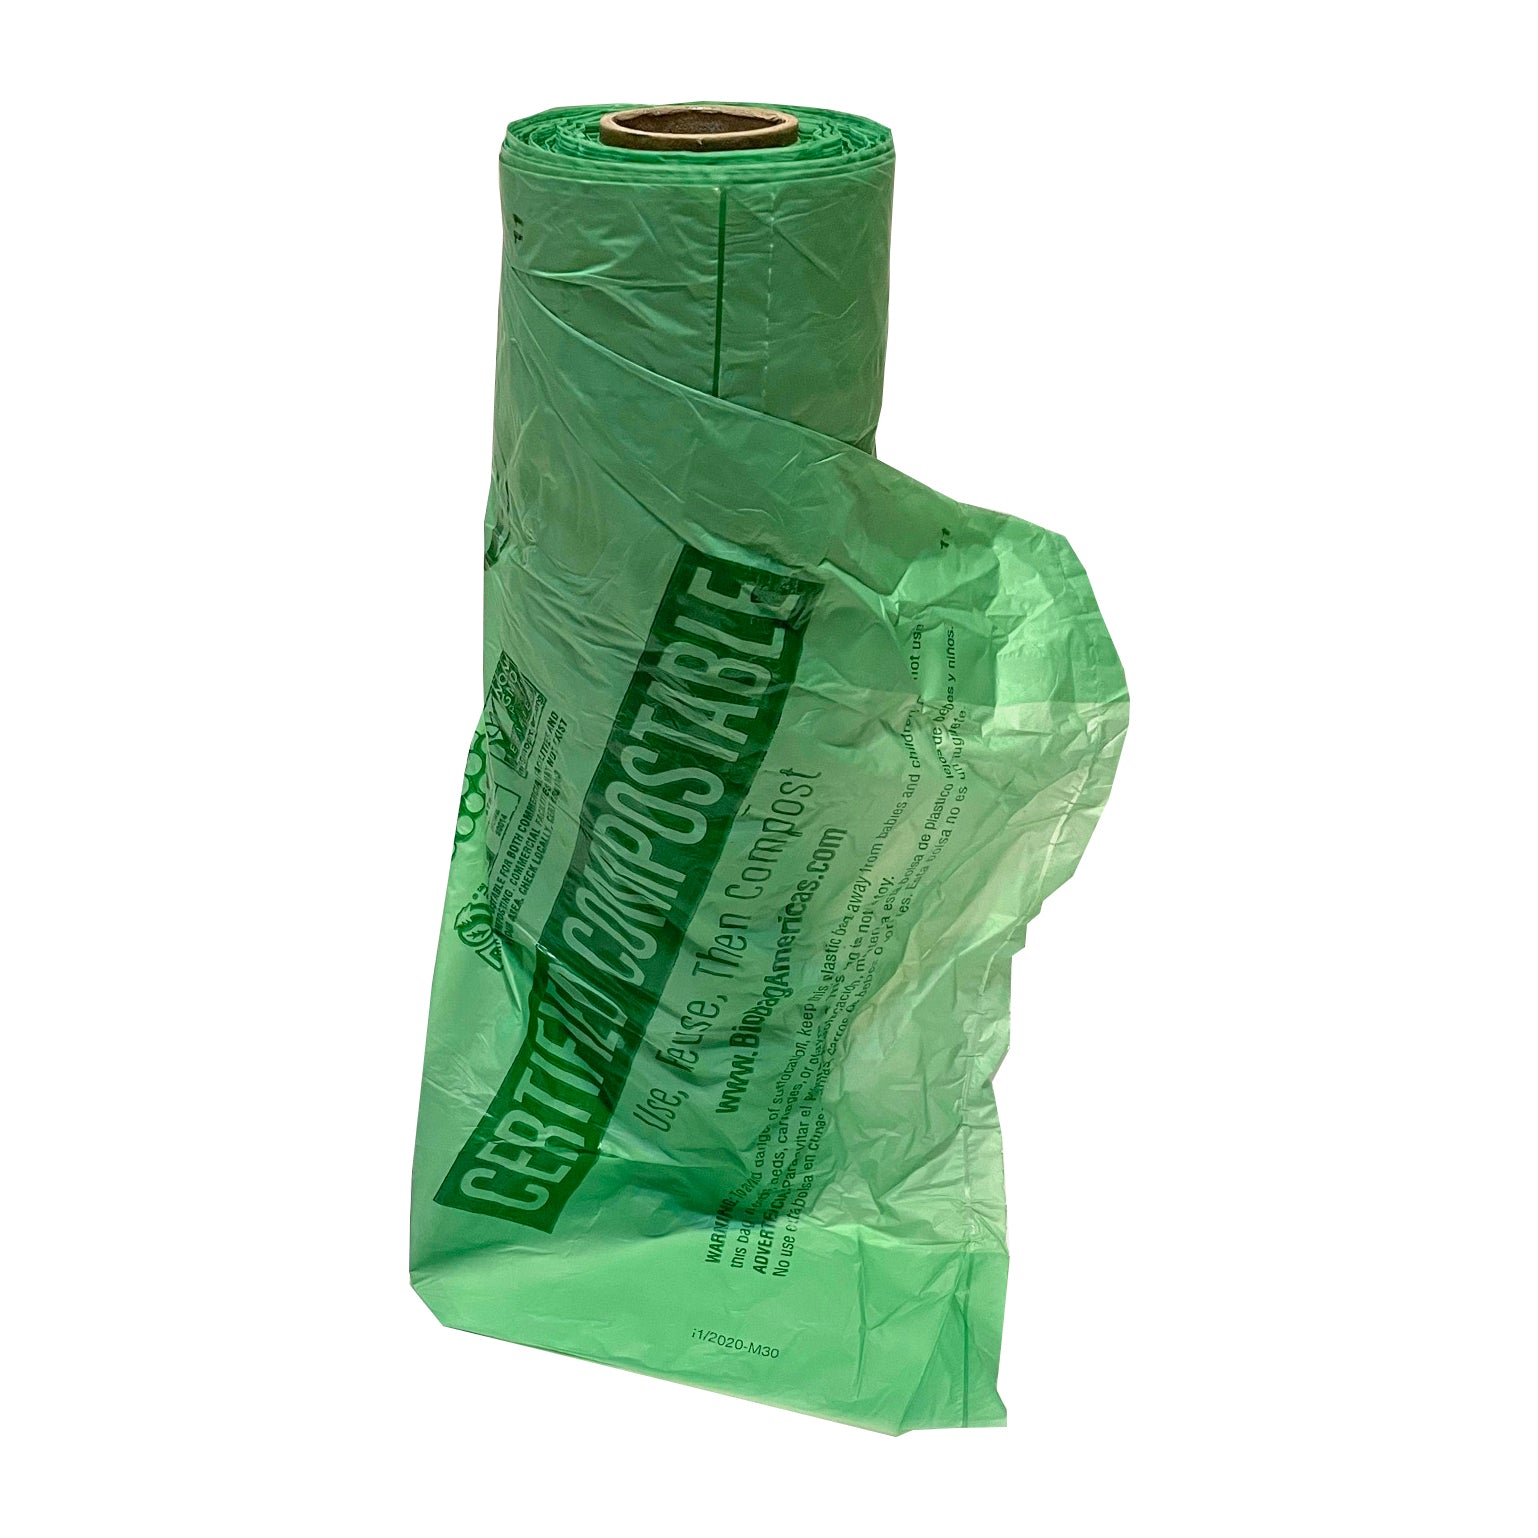 Wholesale Forid Compostable Bags Manufacturer and Supplier